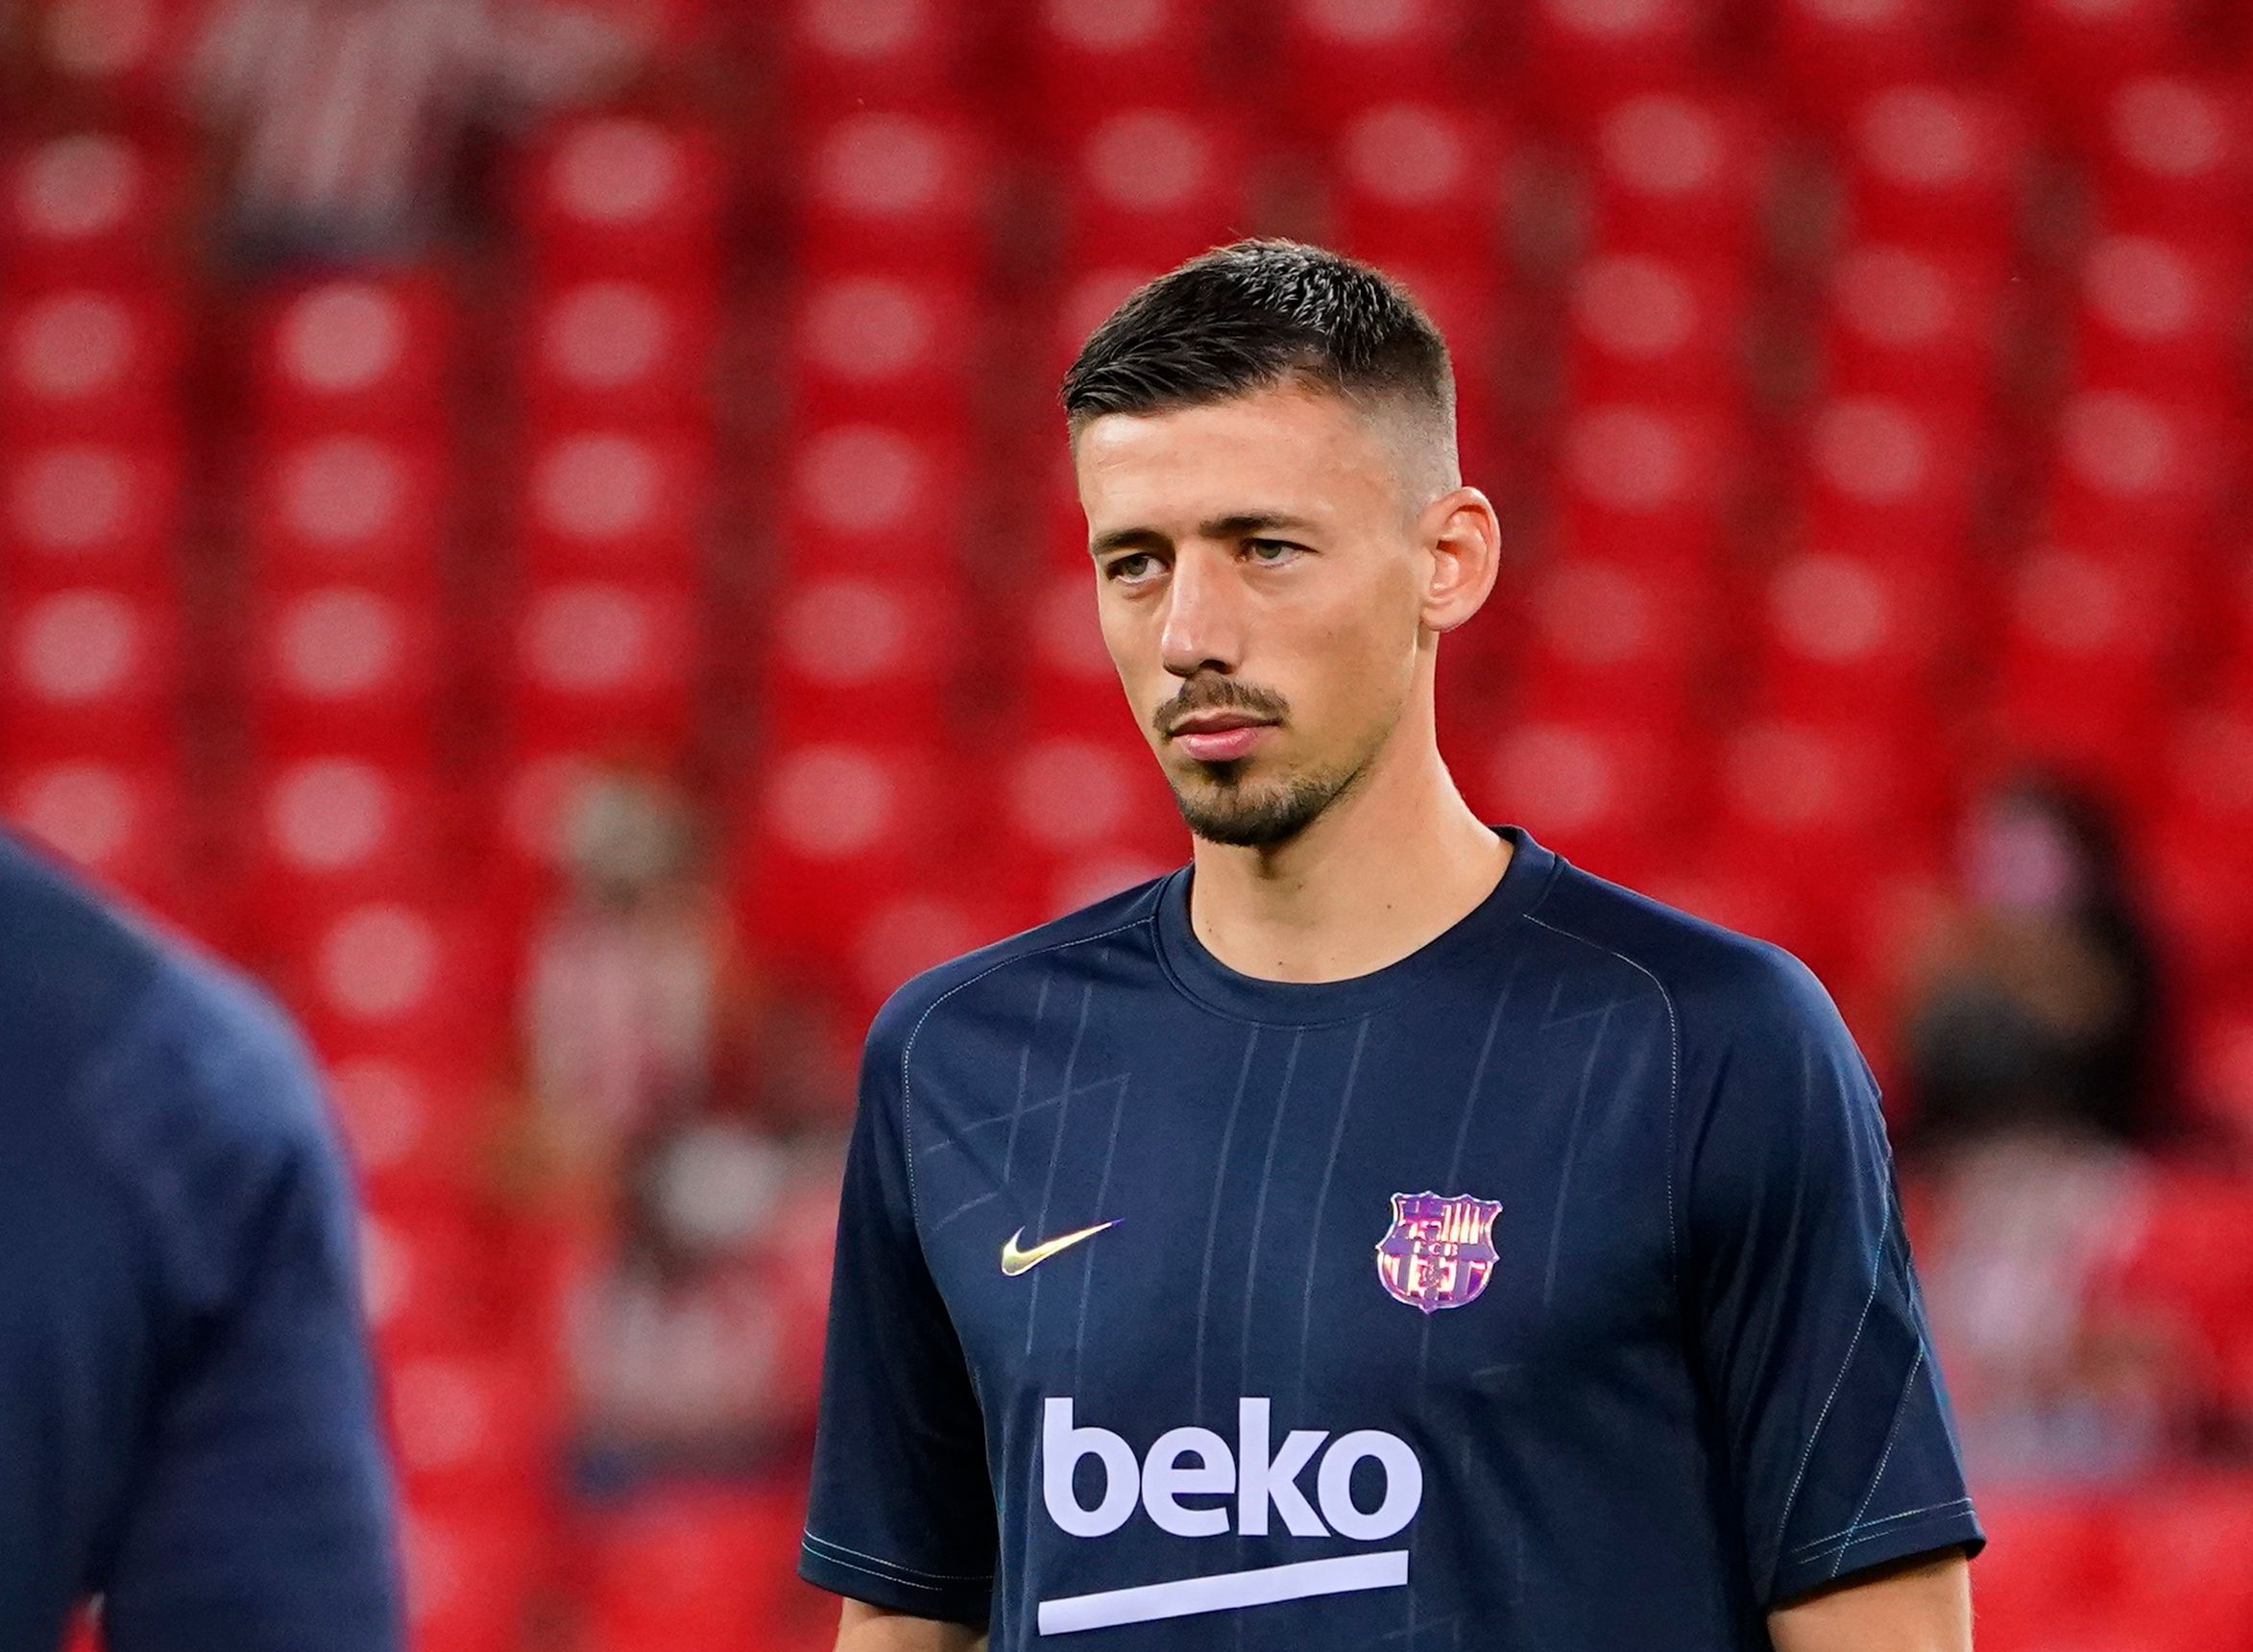 Soccer Football - LaLiga - Athletic Bilbao v Barcelona - San Mames, Bilbao, Spain - August 21, 2021 Barcelona's Clement Lenglet during the warm up before the match REUTERS/Vincent West